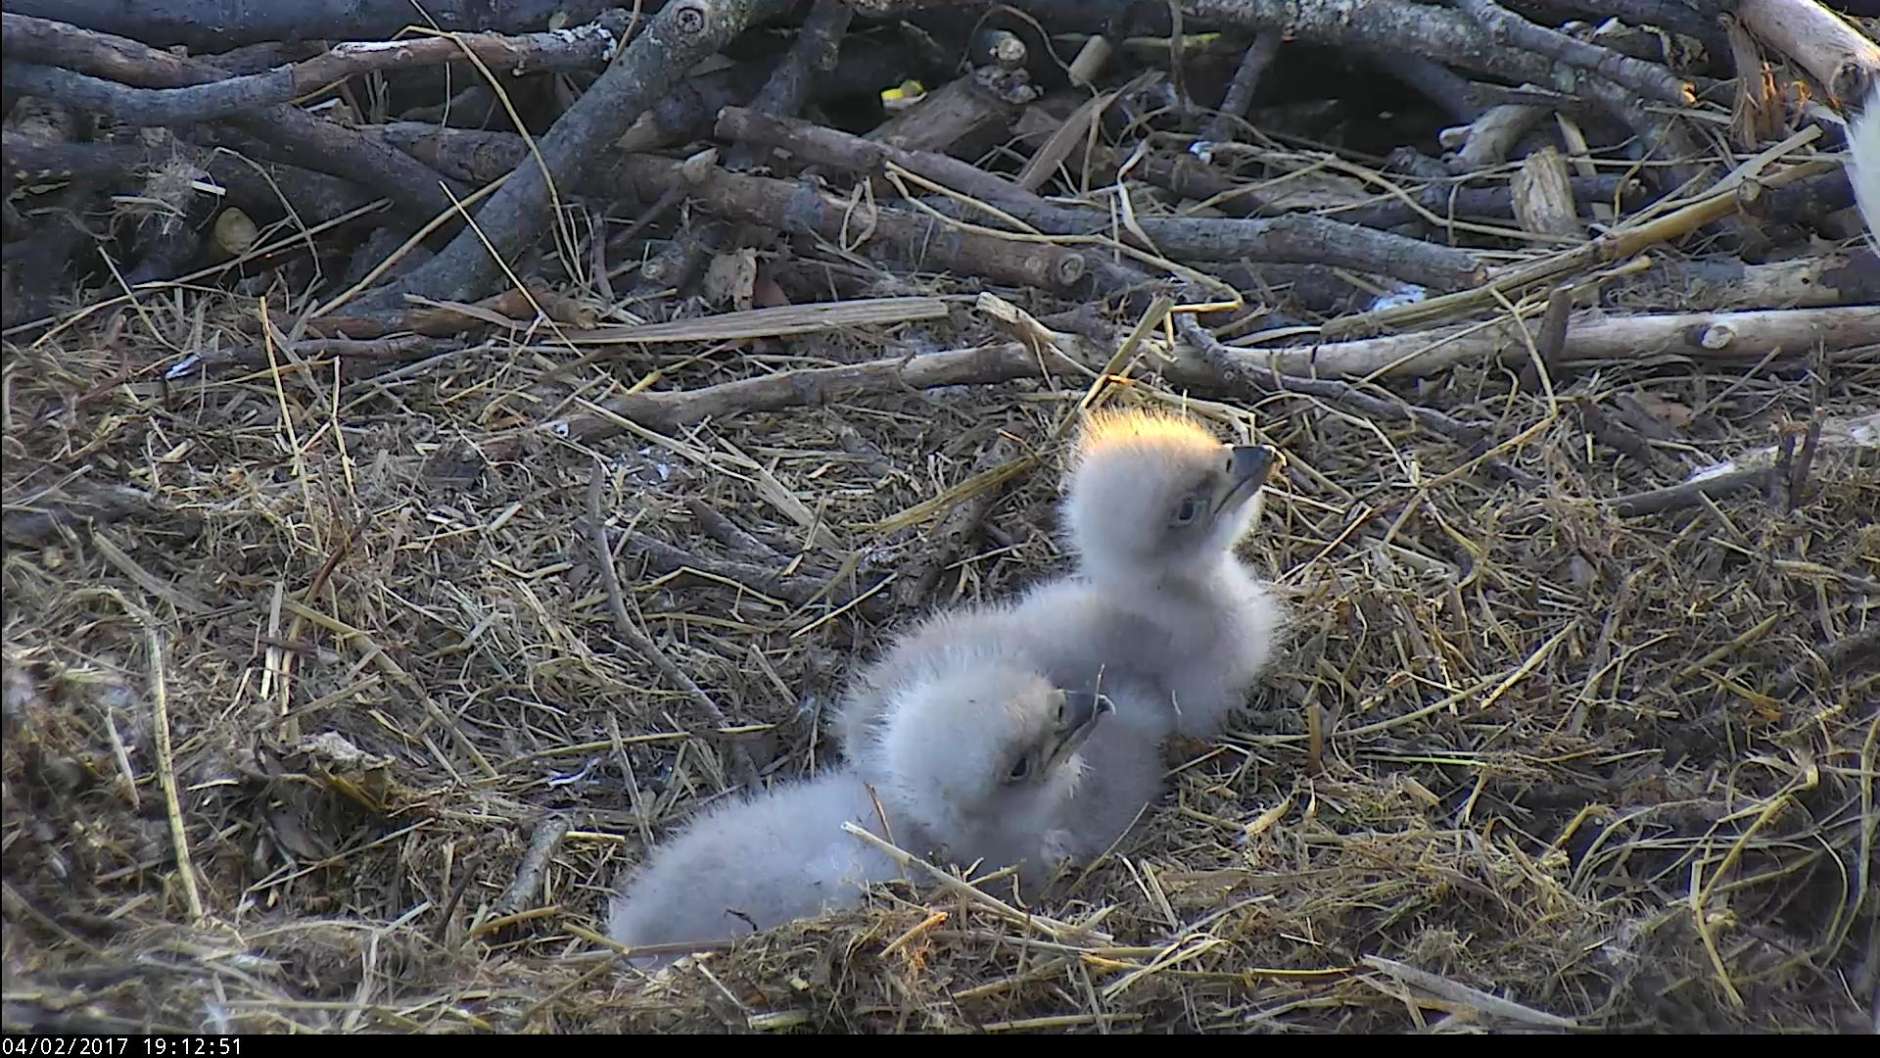 The two baby eaglets at the National Arboretum, shown here April 2, need names. That's where you come in. (© 2017 American Eagle Foundation, DCEAGLECAM.ORG)